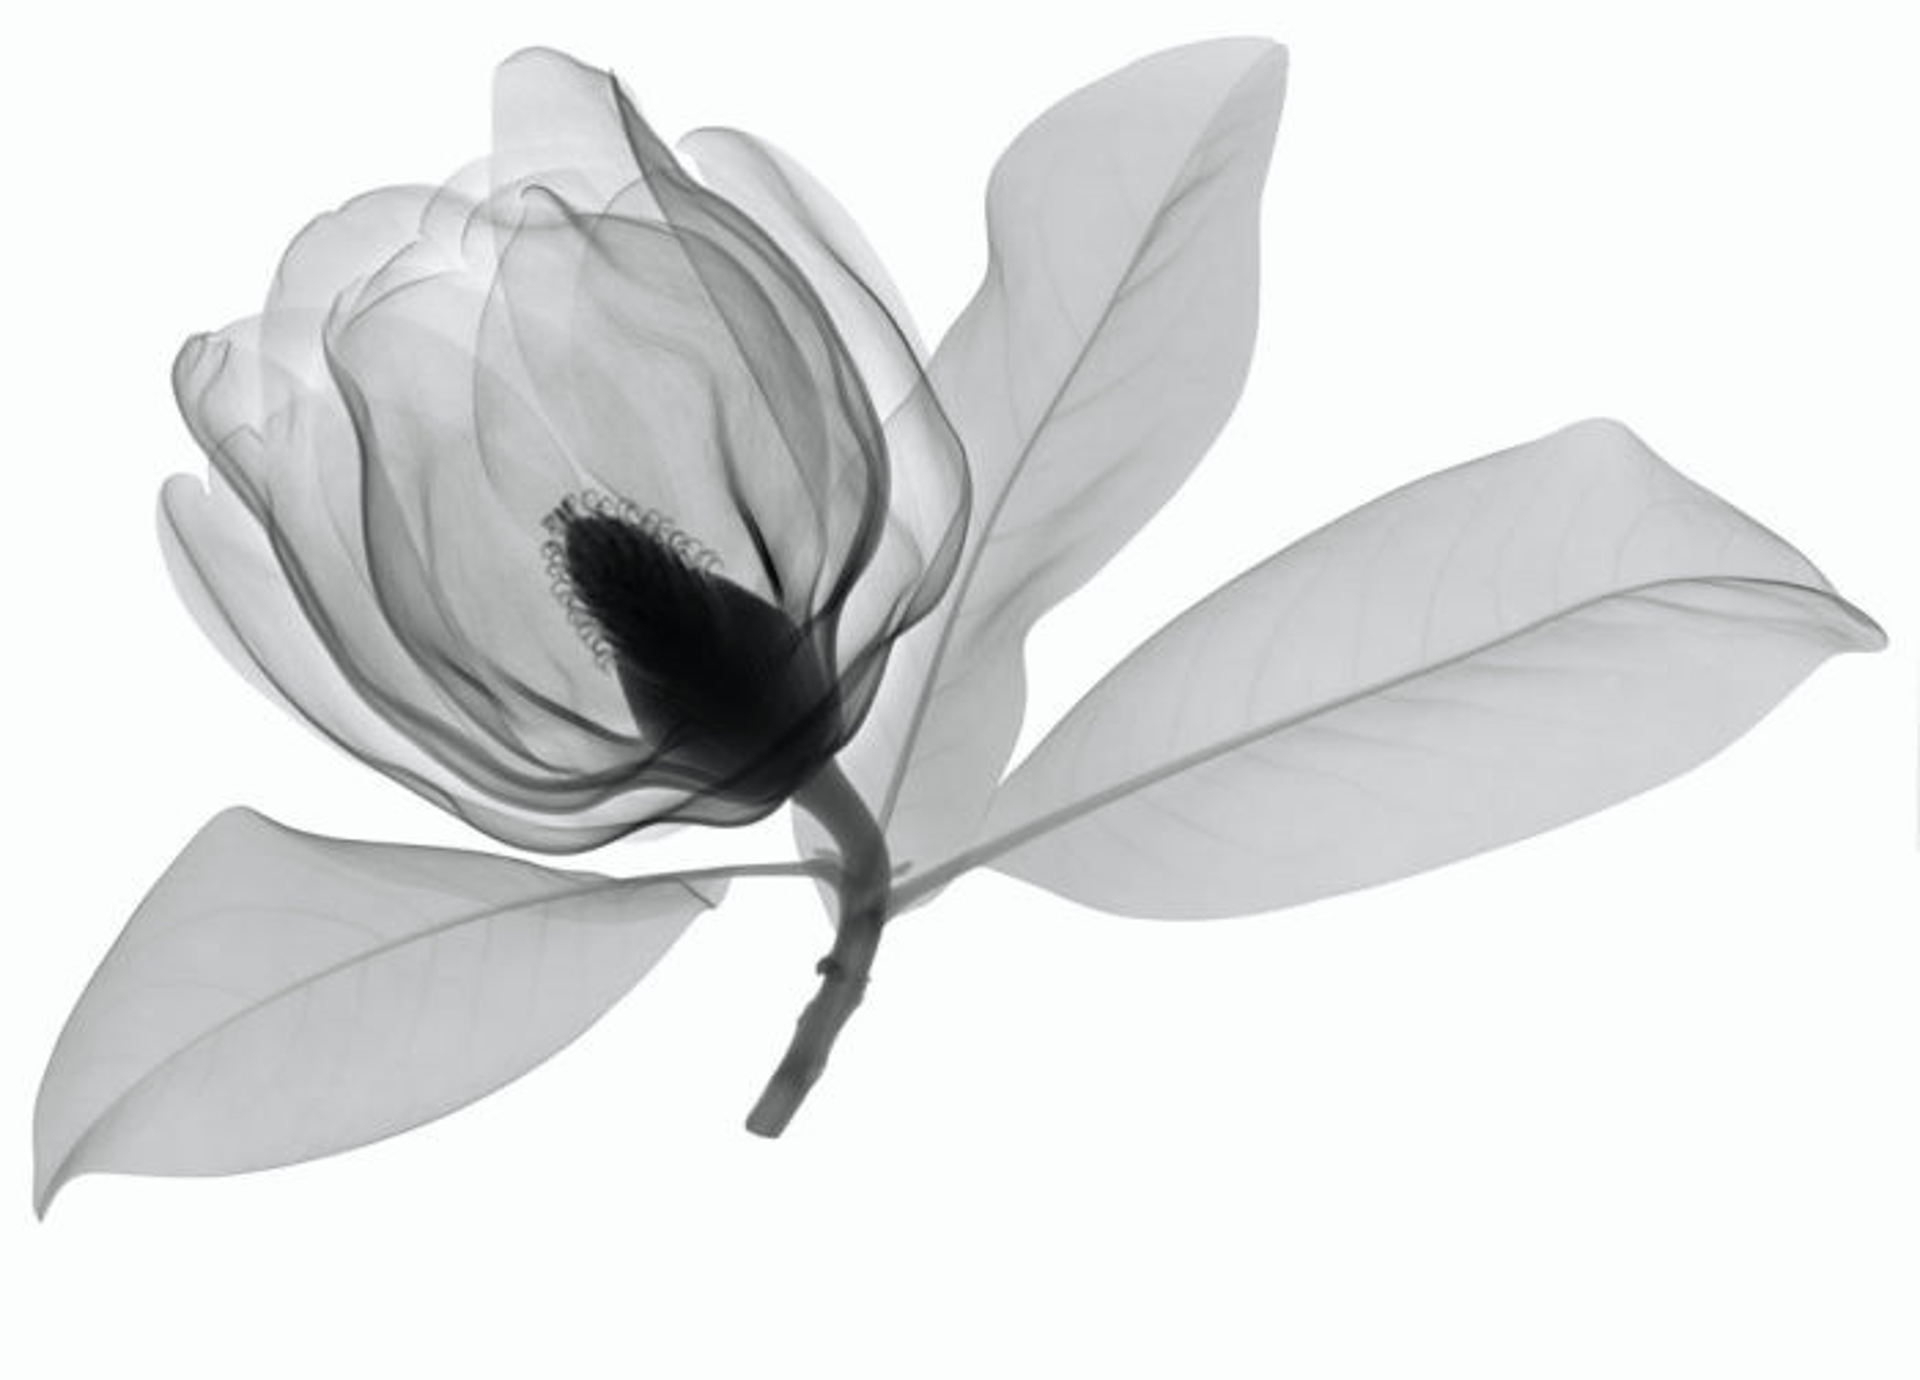 Southern Magnolia 2 by Don Dudenbostel